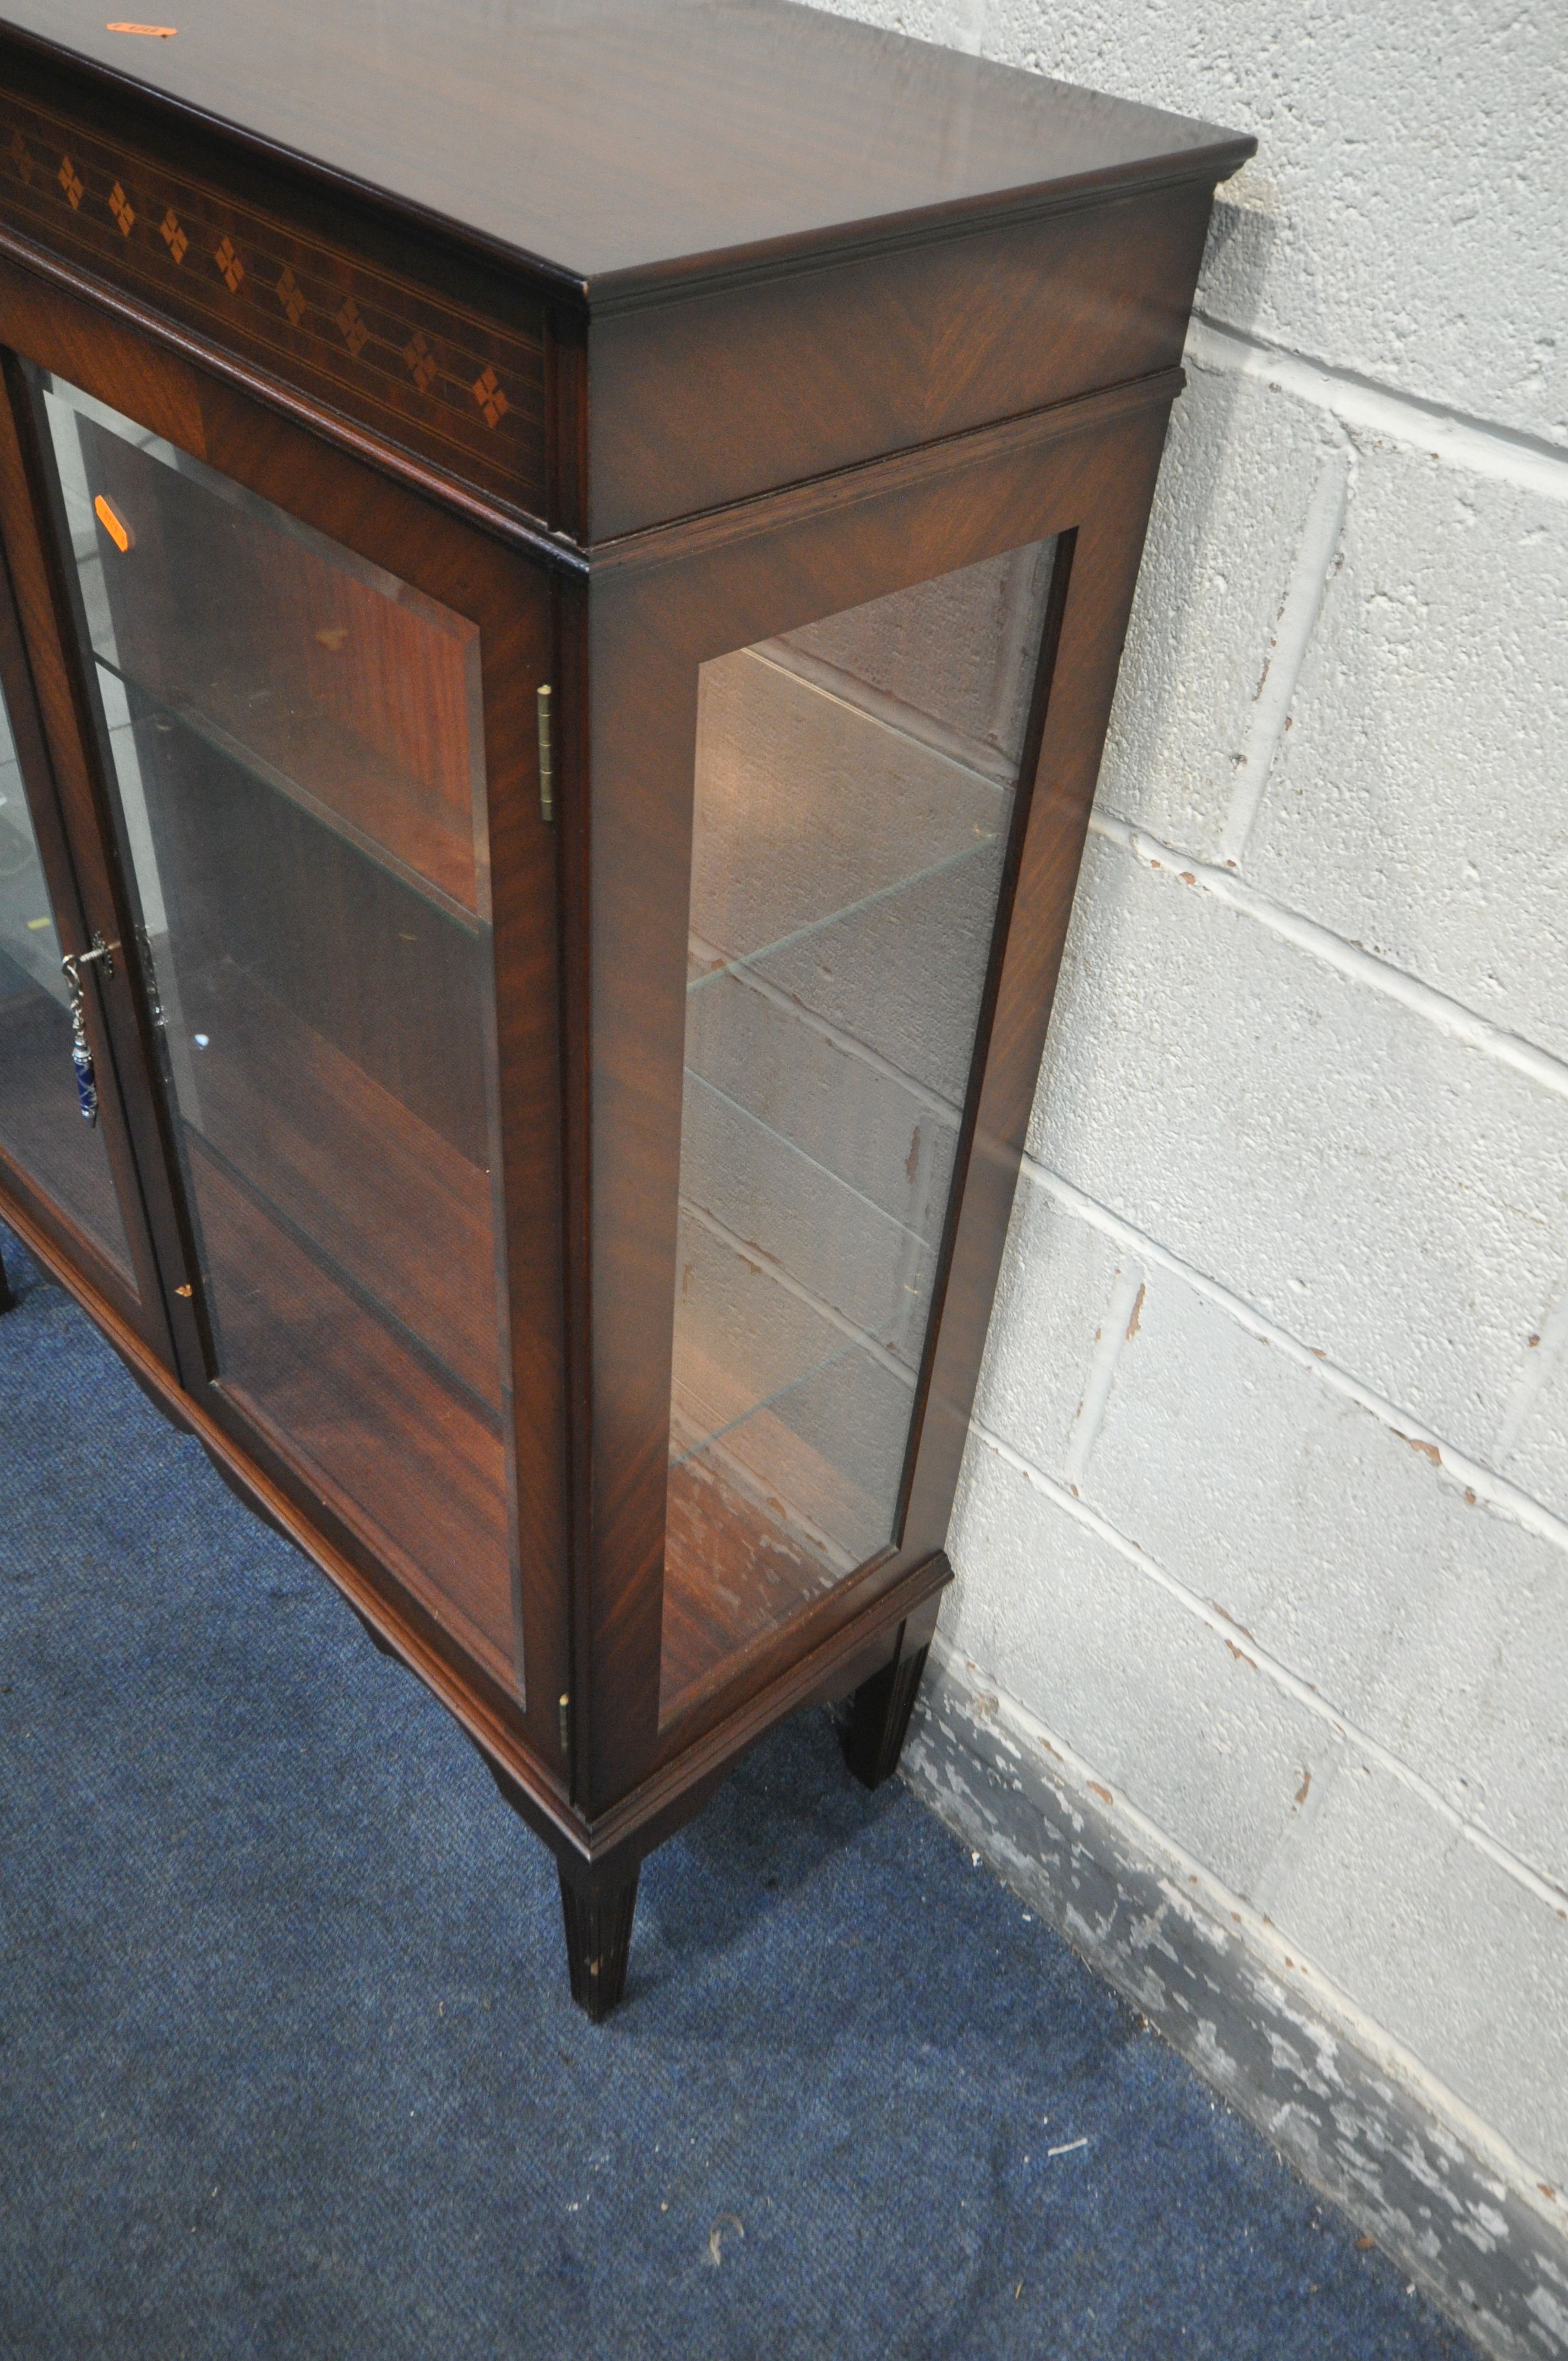 A MAHOGANY GLAZED TWO DOOR DISPLAY CABINET, with two glass shelves, width 95cm x depth 33cm x height - Image 3 of 3